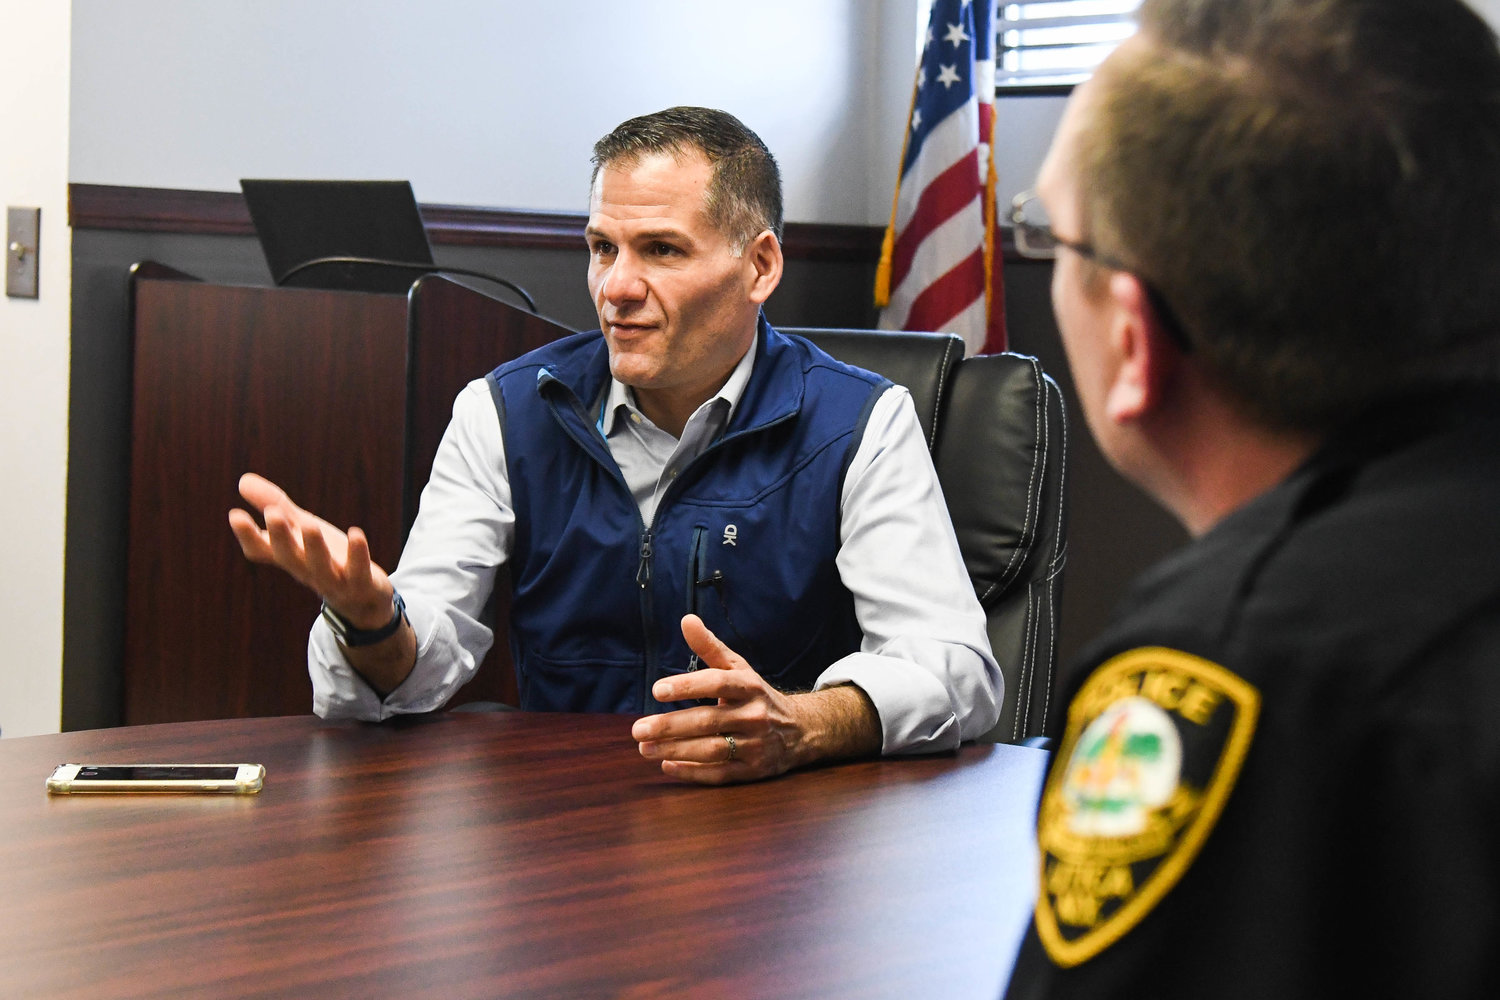 NOT SATISFIED WITH CHANGES — Marc Molinaro joined Utica police on Tuesday to discuss local issues in the community and the impact that cashless bail has had on the city of Utica. Molinaro said more needs to be done to protect communities and support law enforcement.